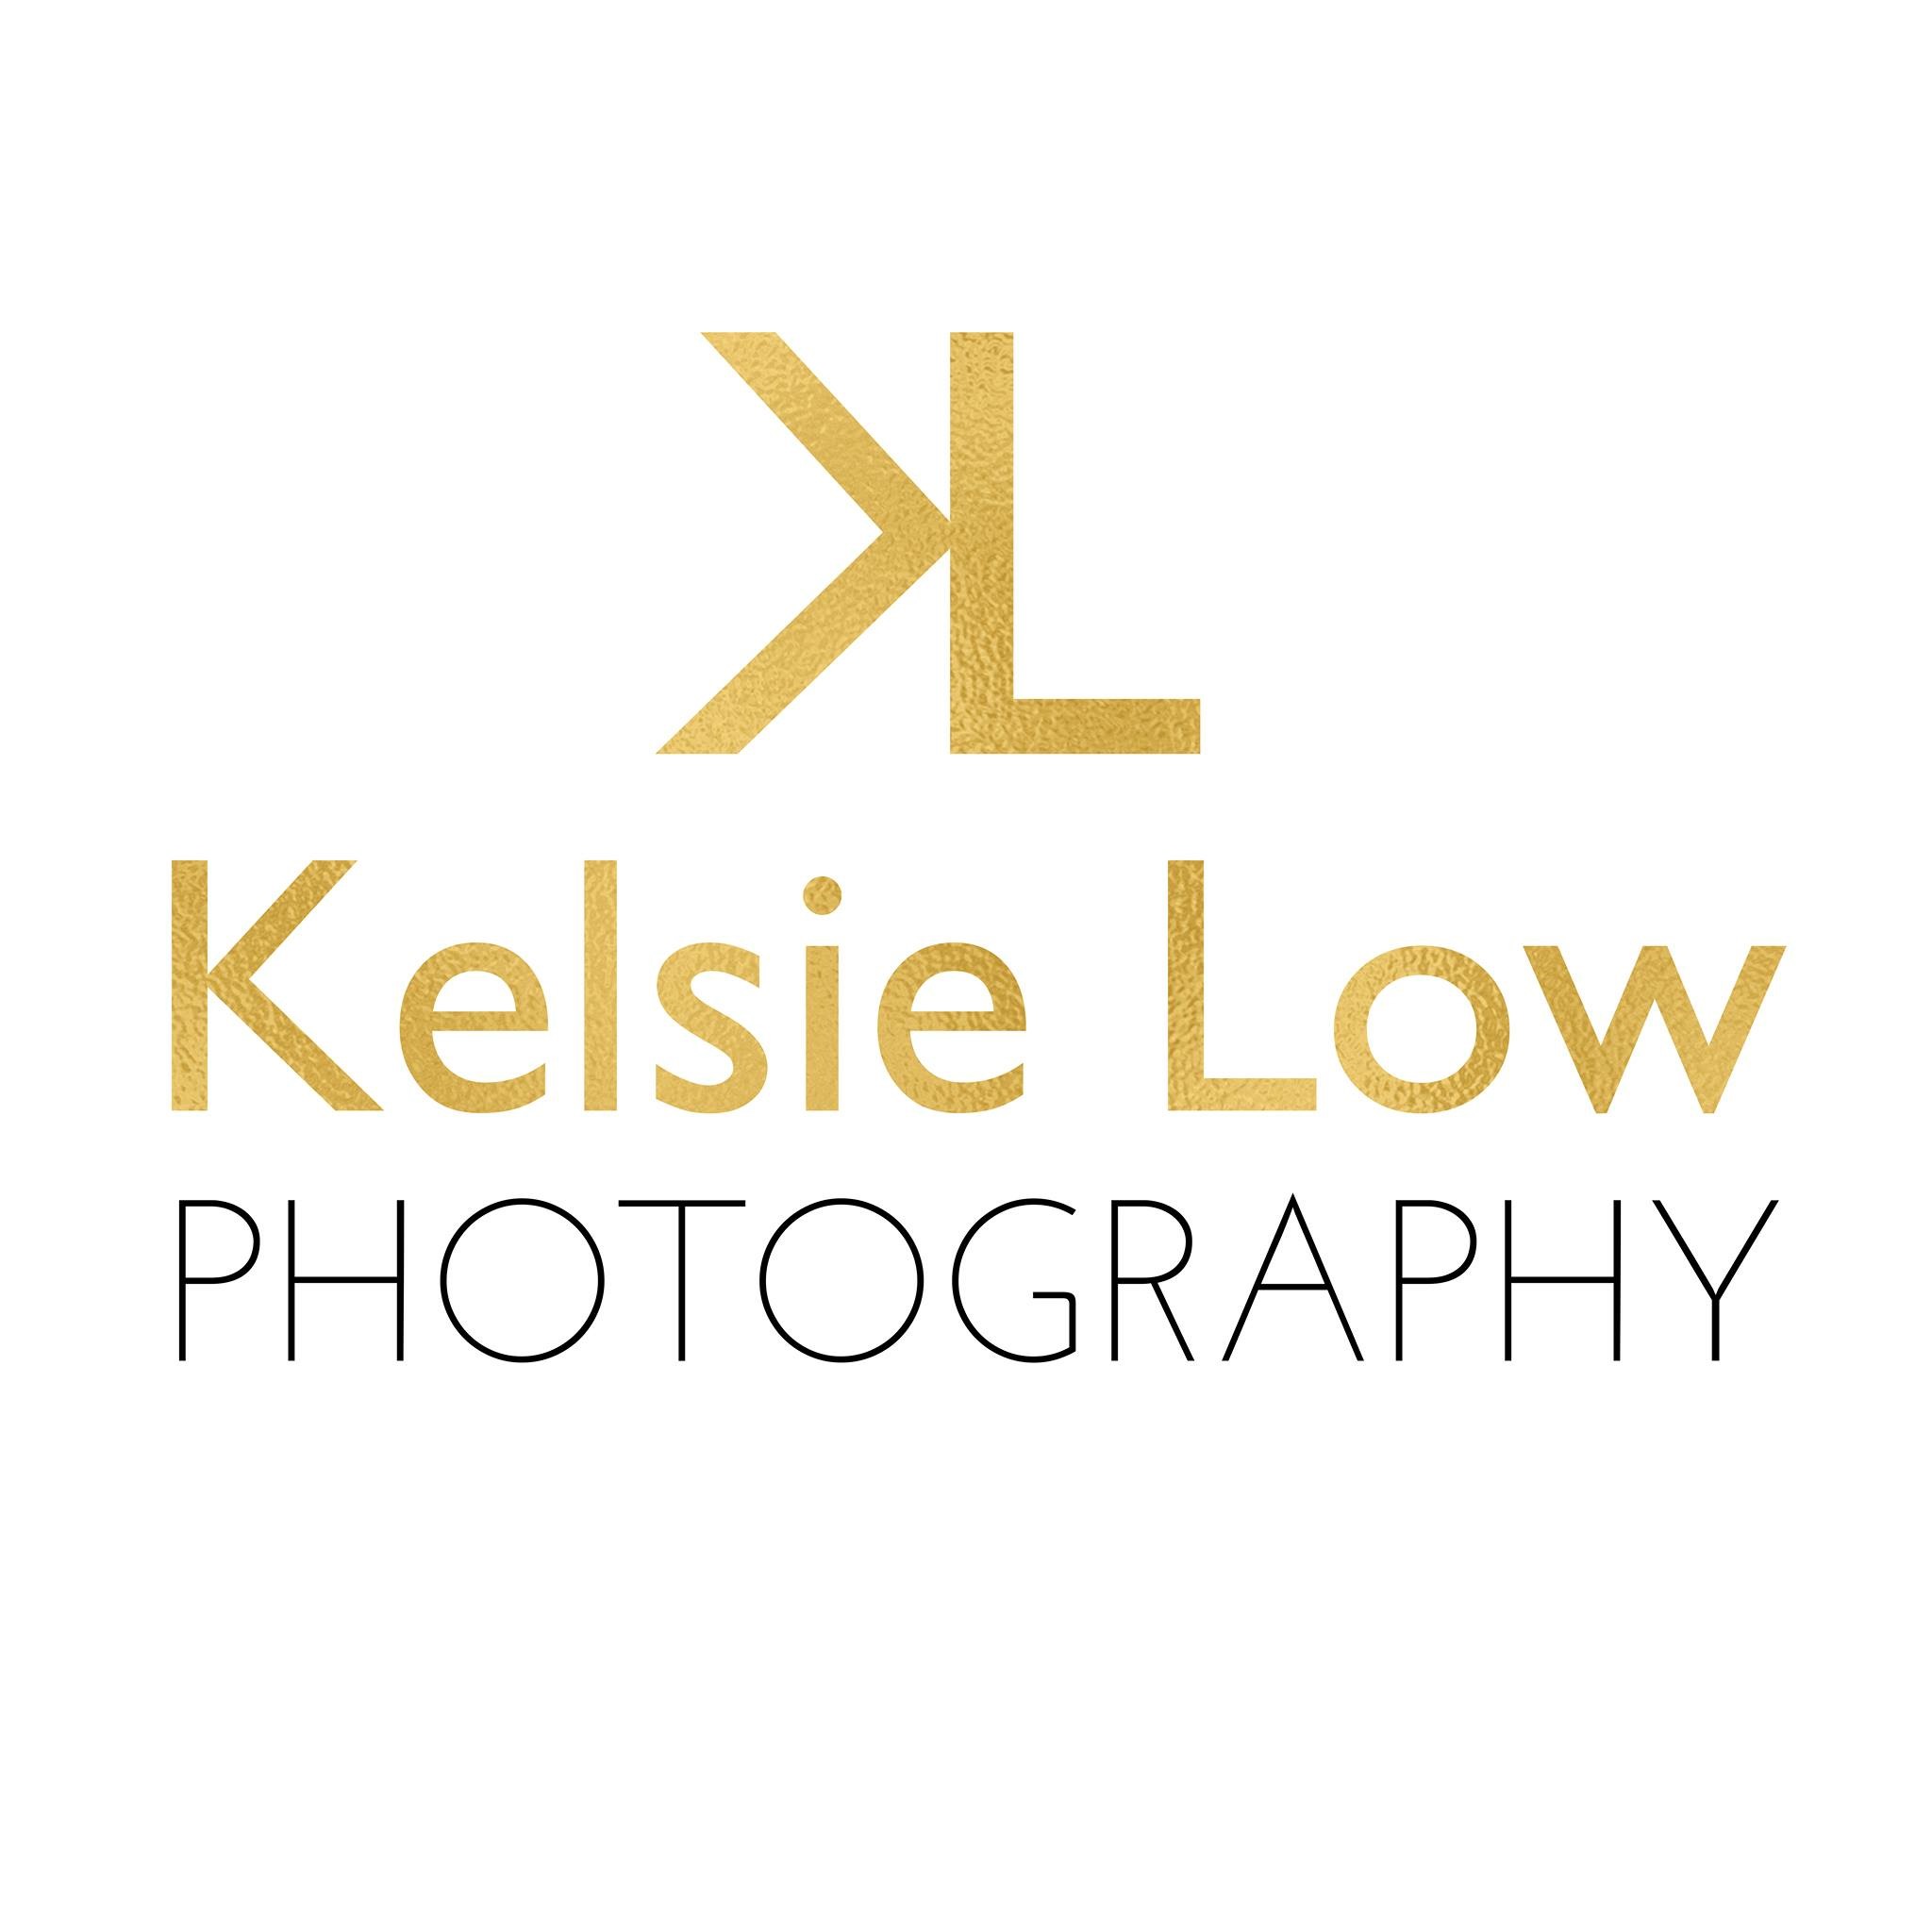 Logo of Kelsie Low Photography Wedding Photographers In Clacton On Sea, Essex